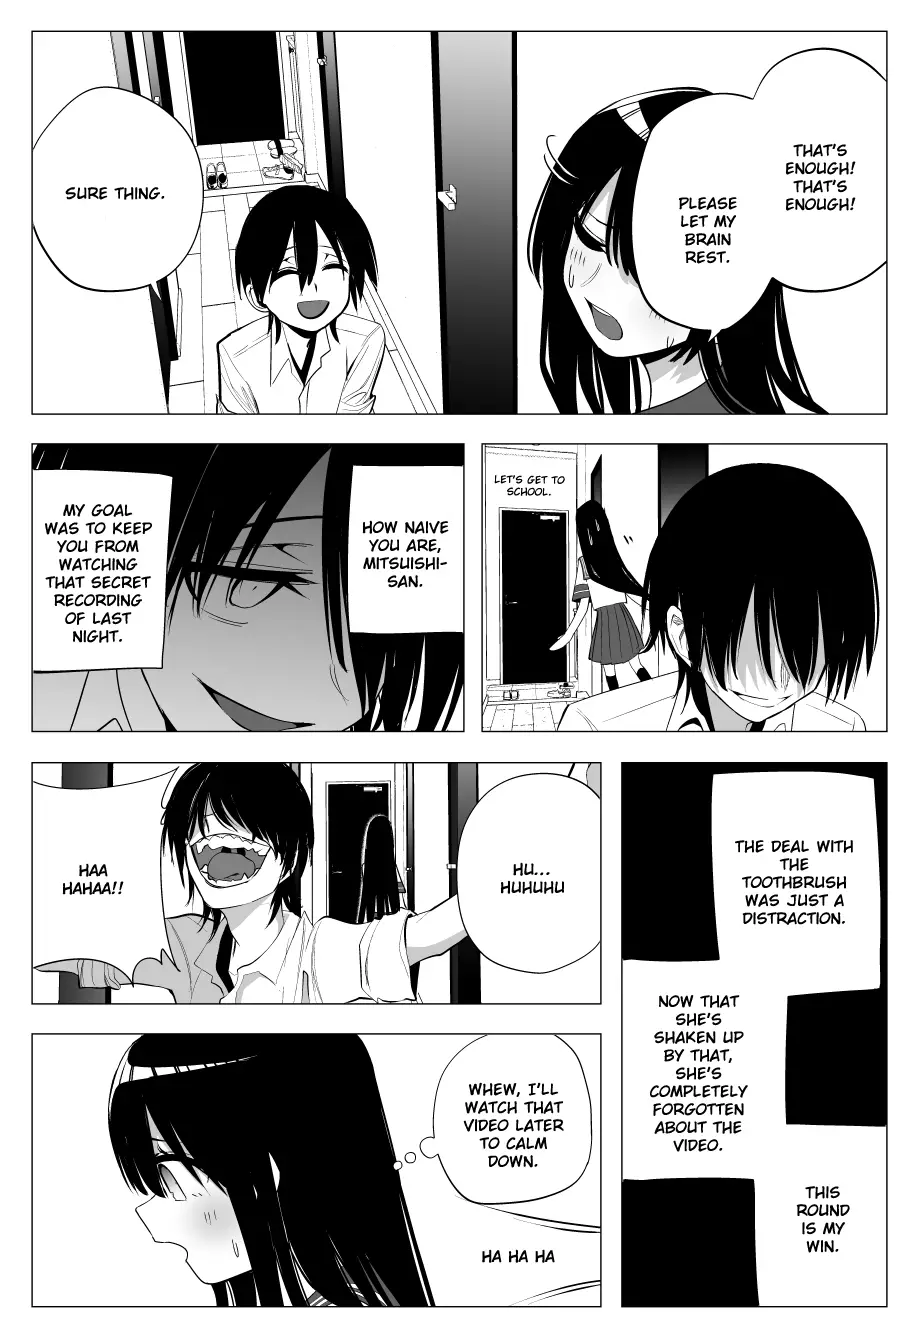 Mitsuishi-San Is Being Weird This Year - 29 page 20-8671d422